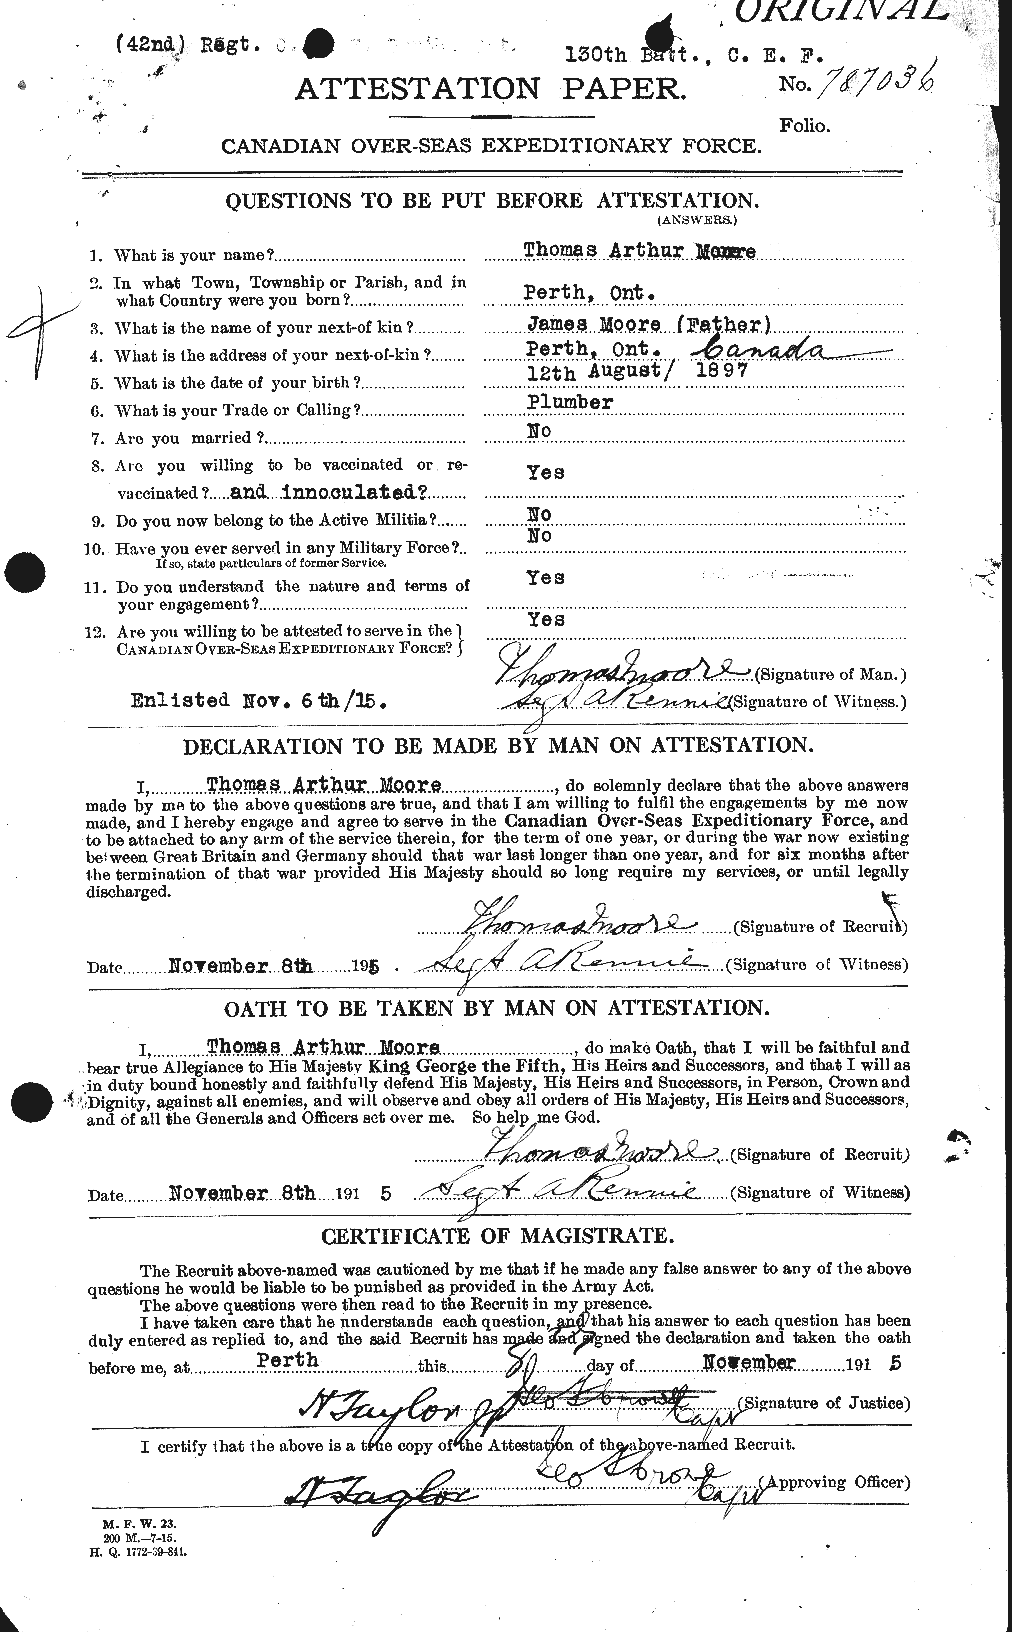 Personnel Records of the First World War - CEF 505642a